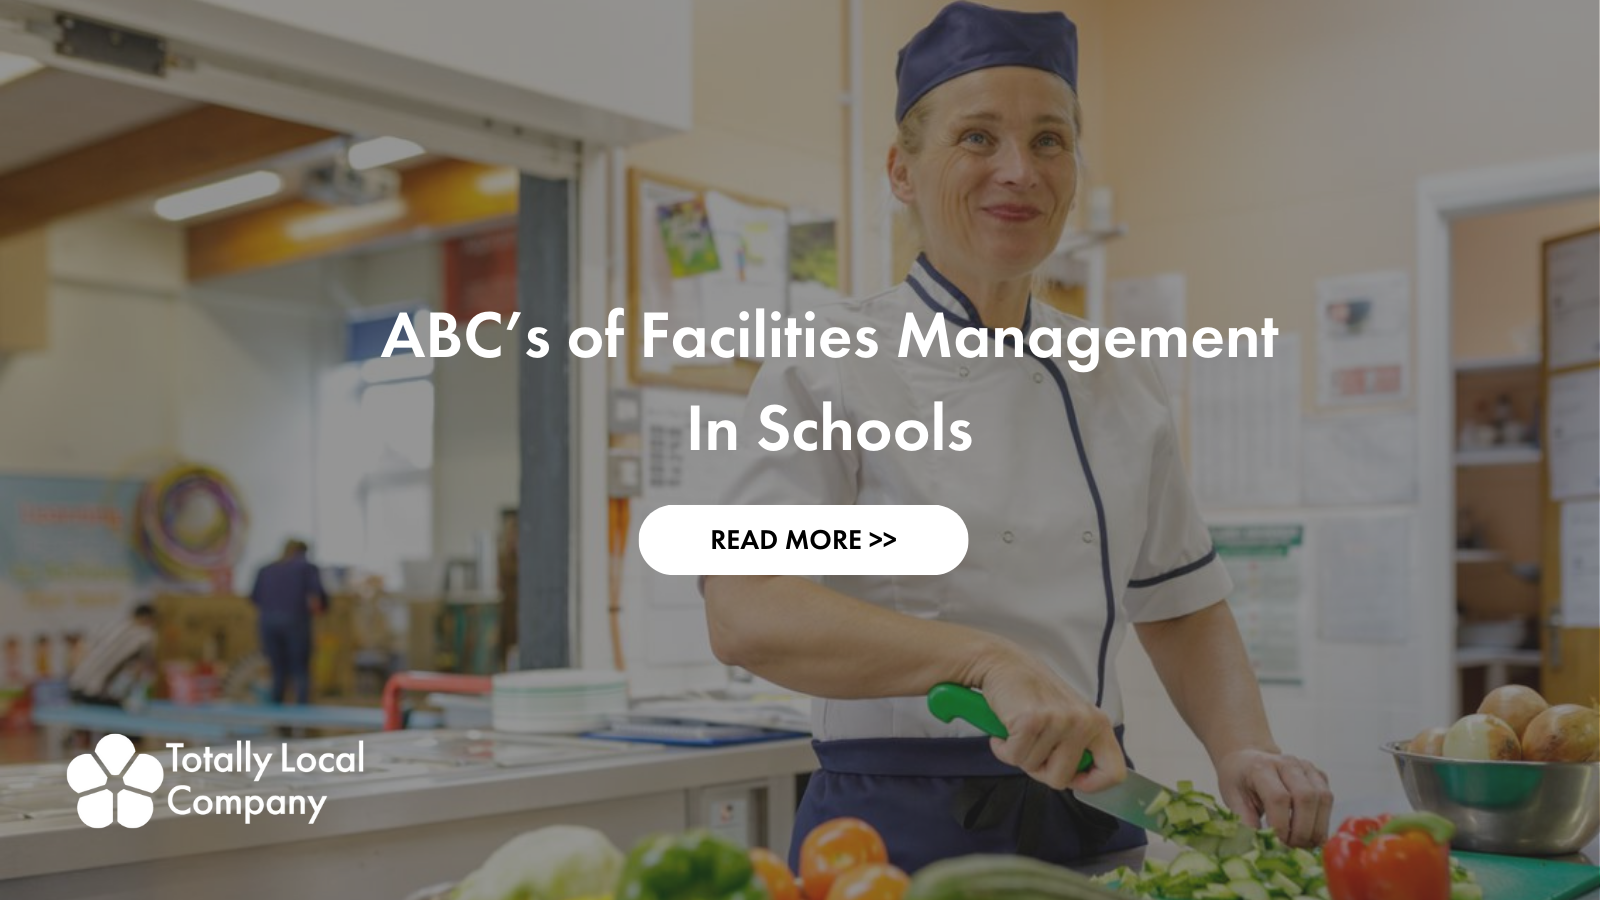 The ABC’s of Facilities Management – a lesson in facilities management in schools